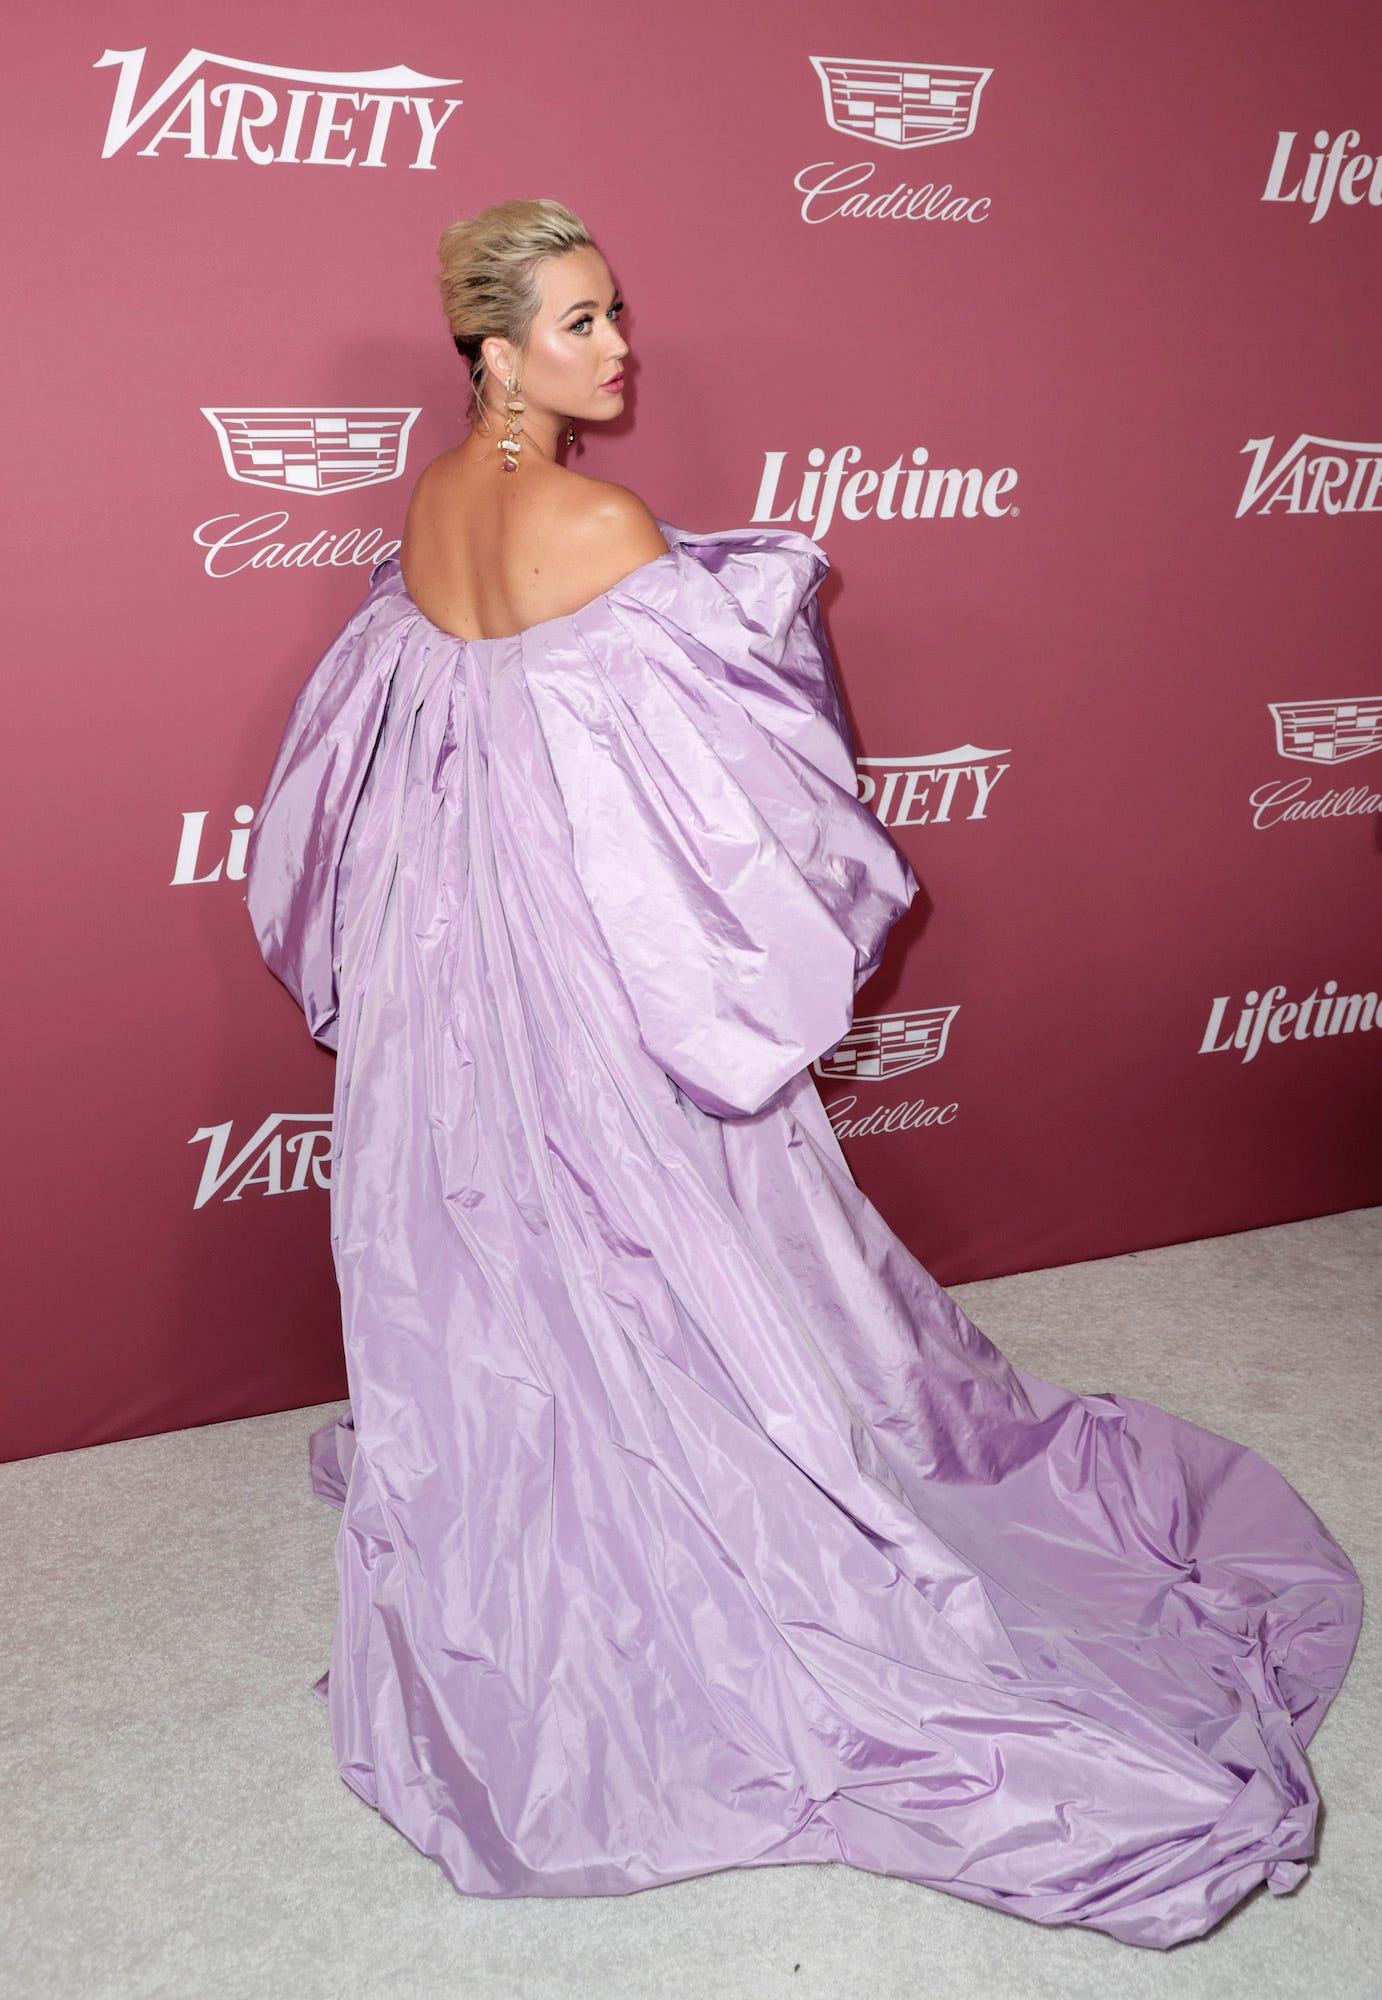 Katy Perry wears Schiaparelli at Variety's 2021 Power of Women event.